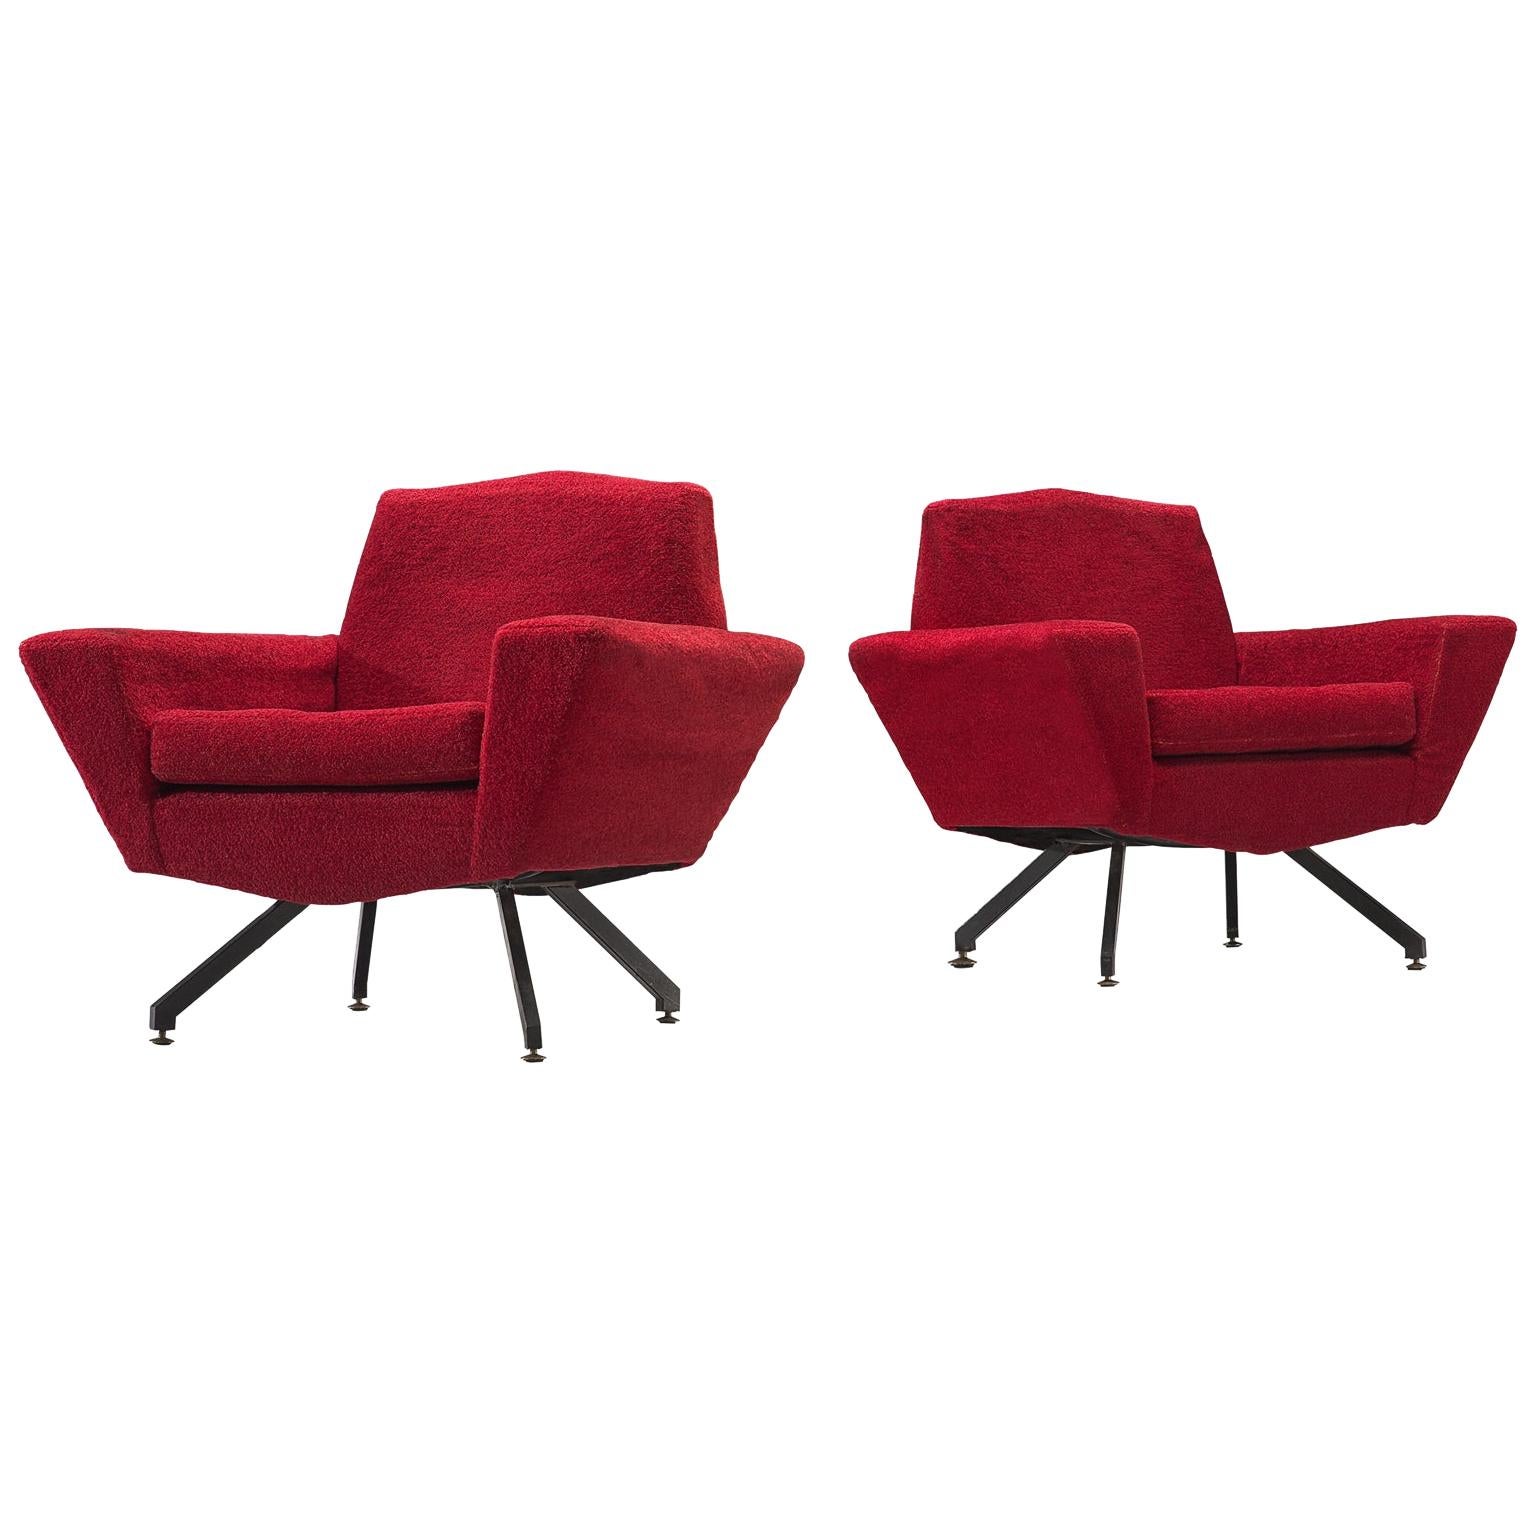 Italian Pair of Lounge Chairs with Red Upholstery